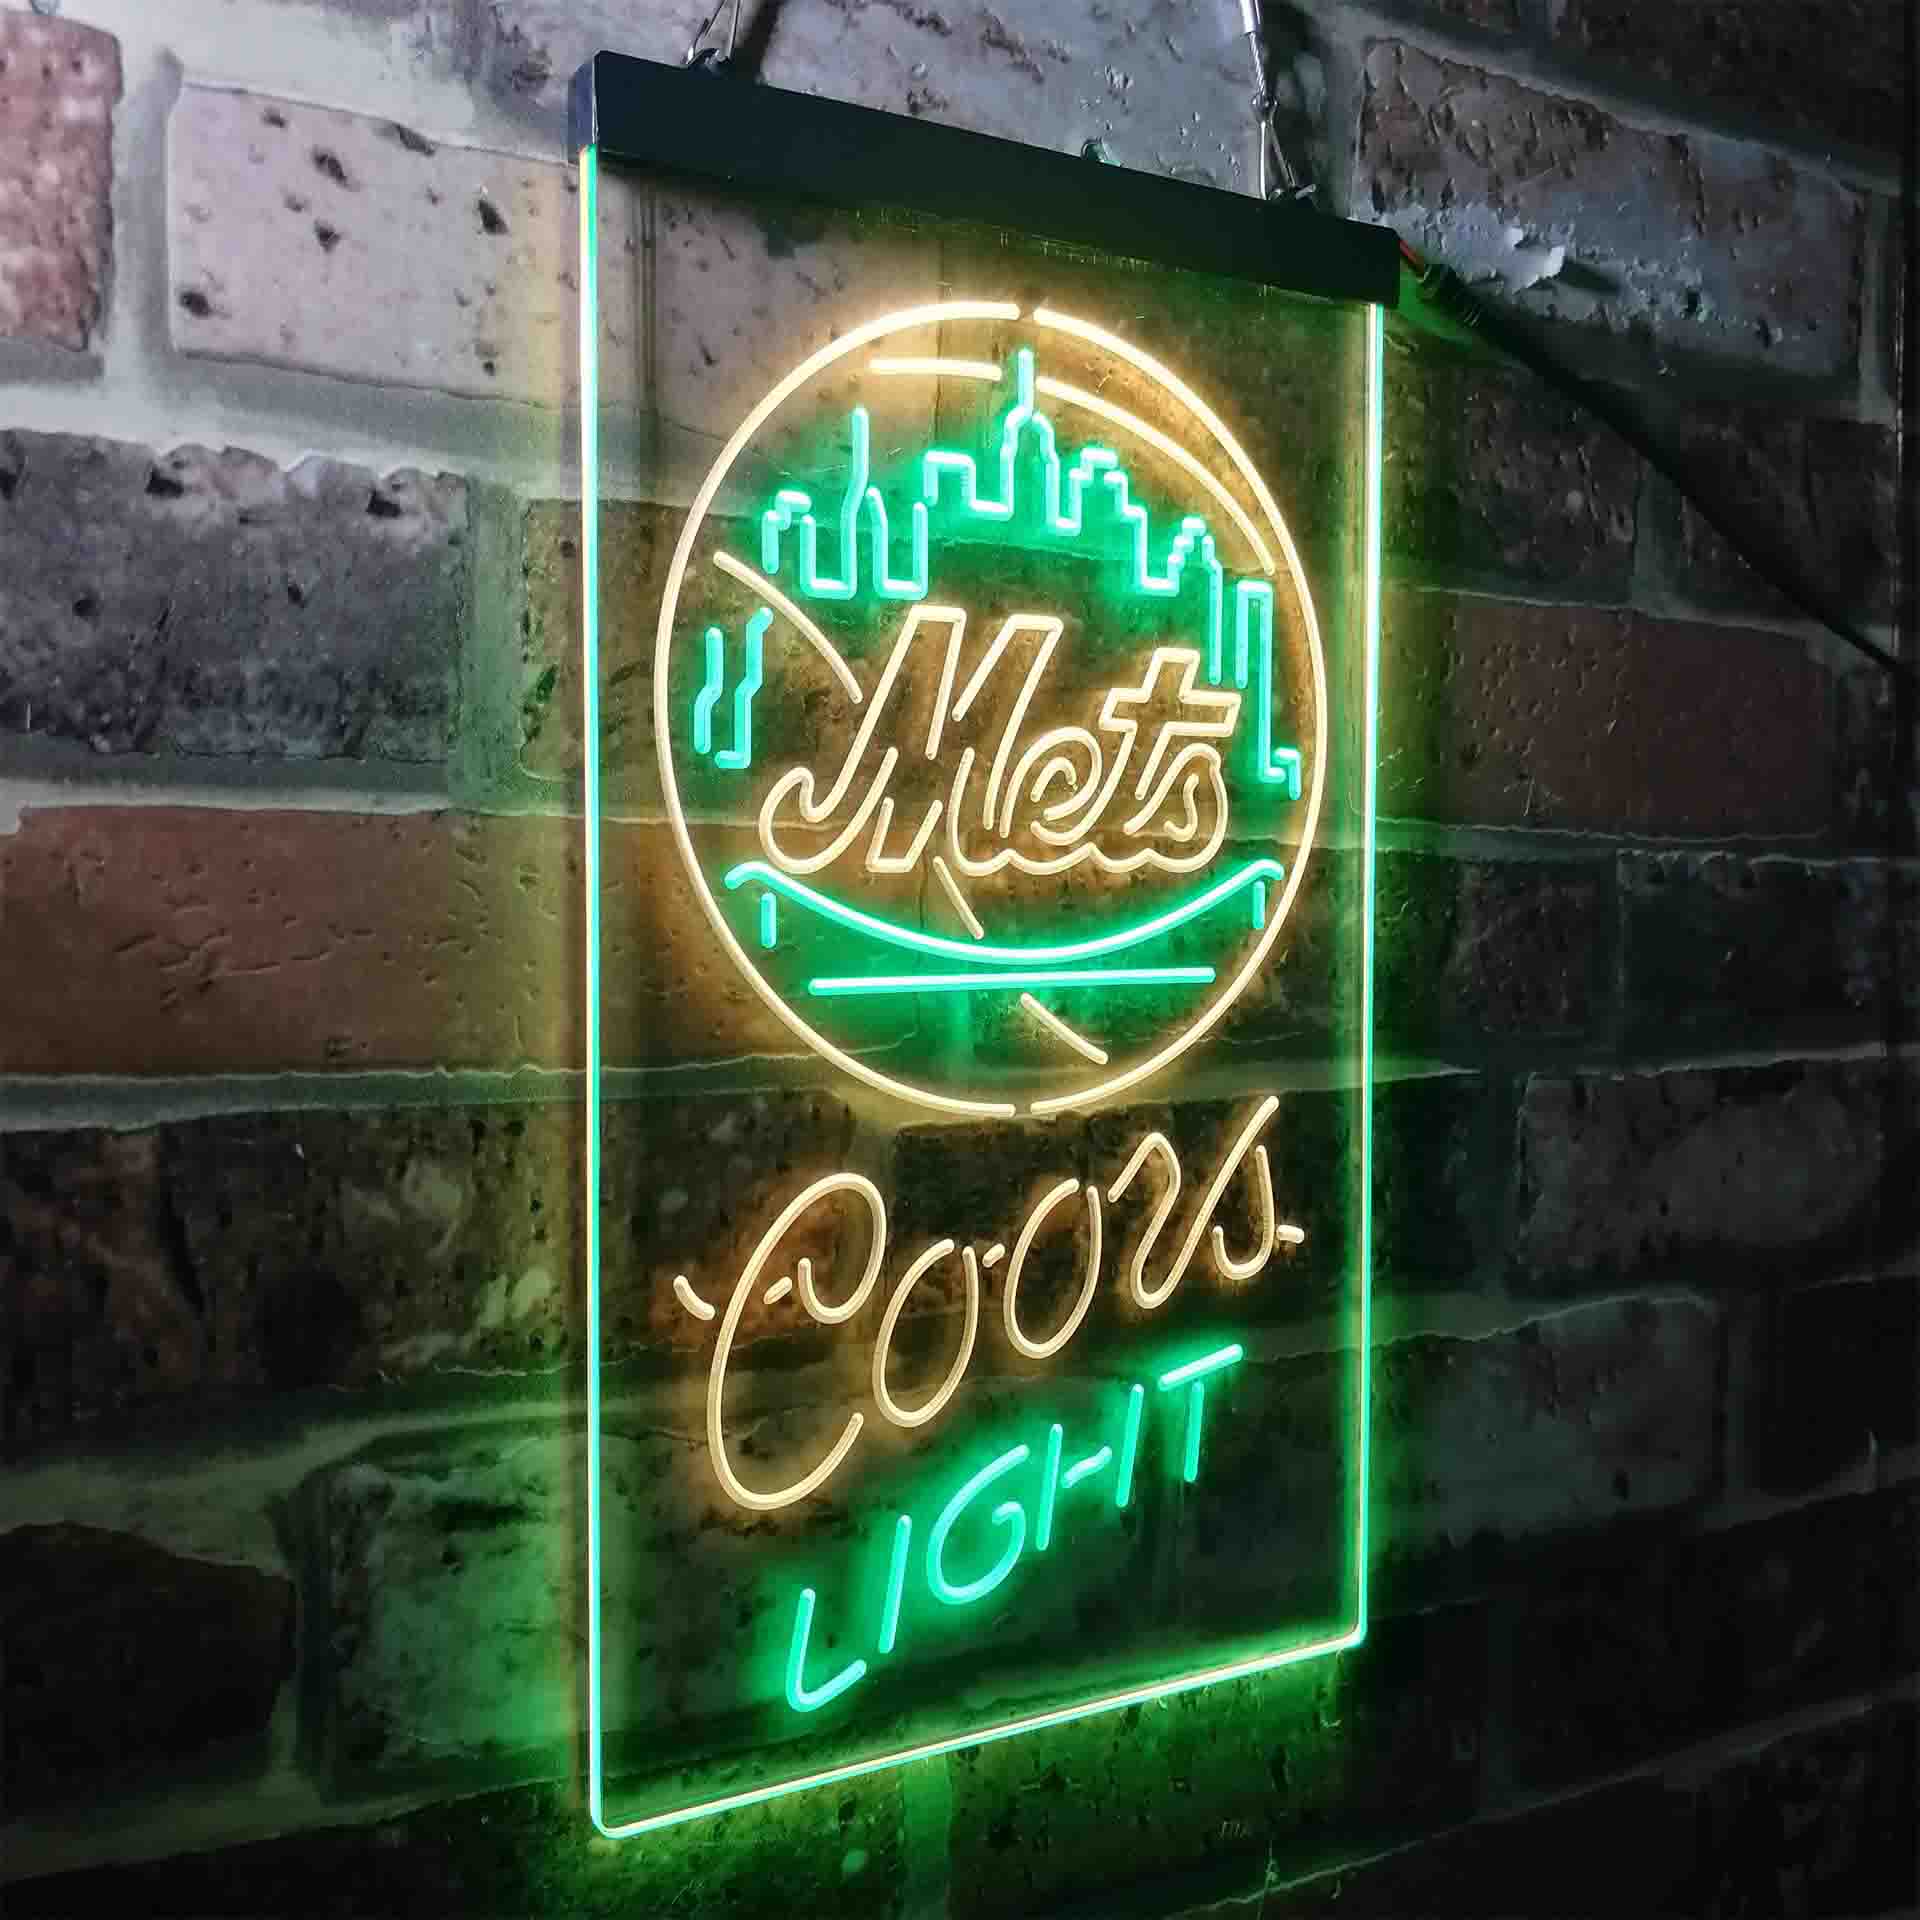 New York Mets Coors Light LED Neon Sign